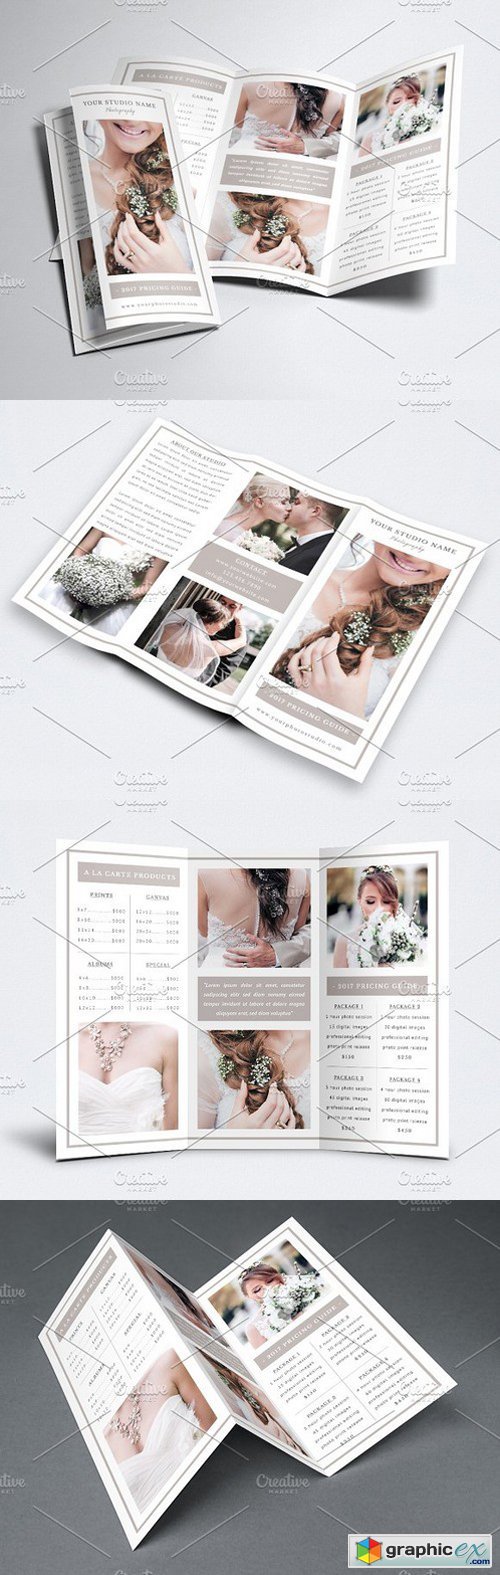 Photography Trifold Brochure Template 1644003